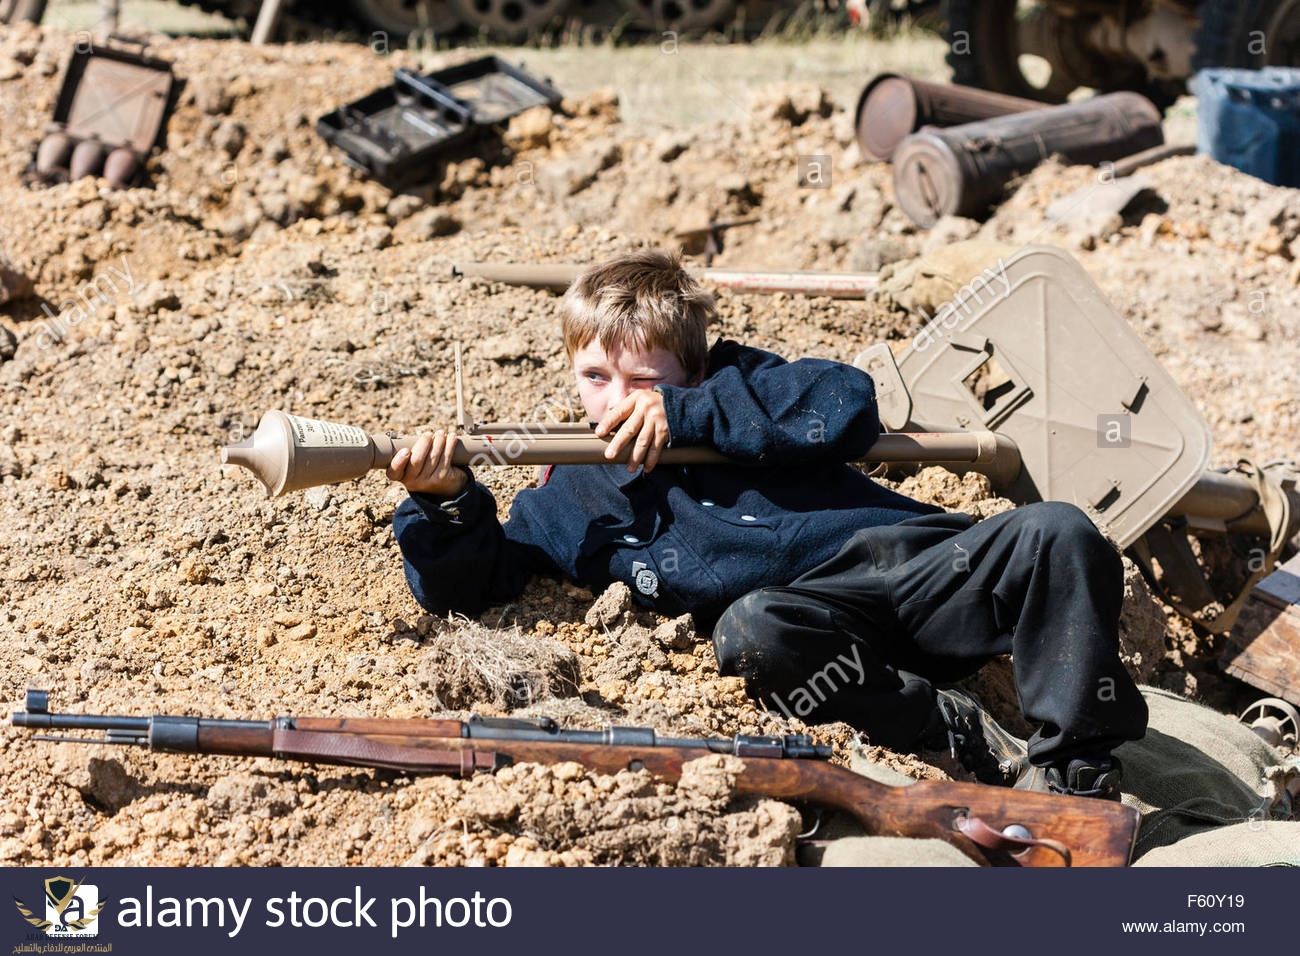 ww2-re-enactment-german-hitler-youth-child-10-14-years-old-laying-F60Y19.jpg